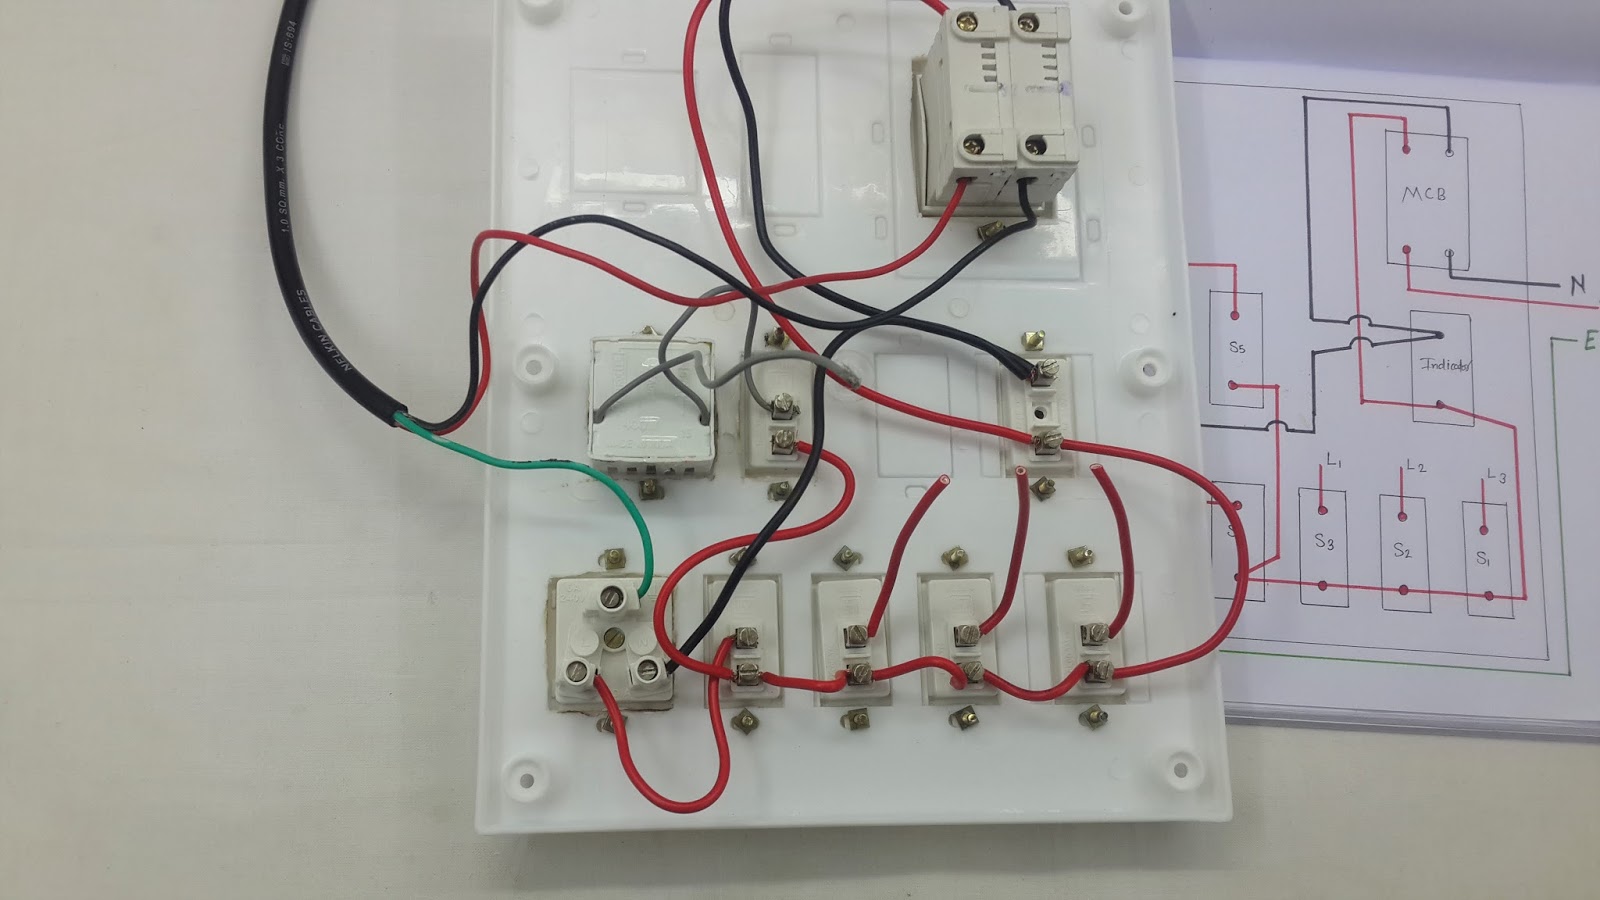 House Wiring of Main Electrical Board Step by Step